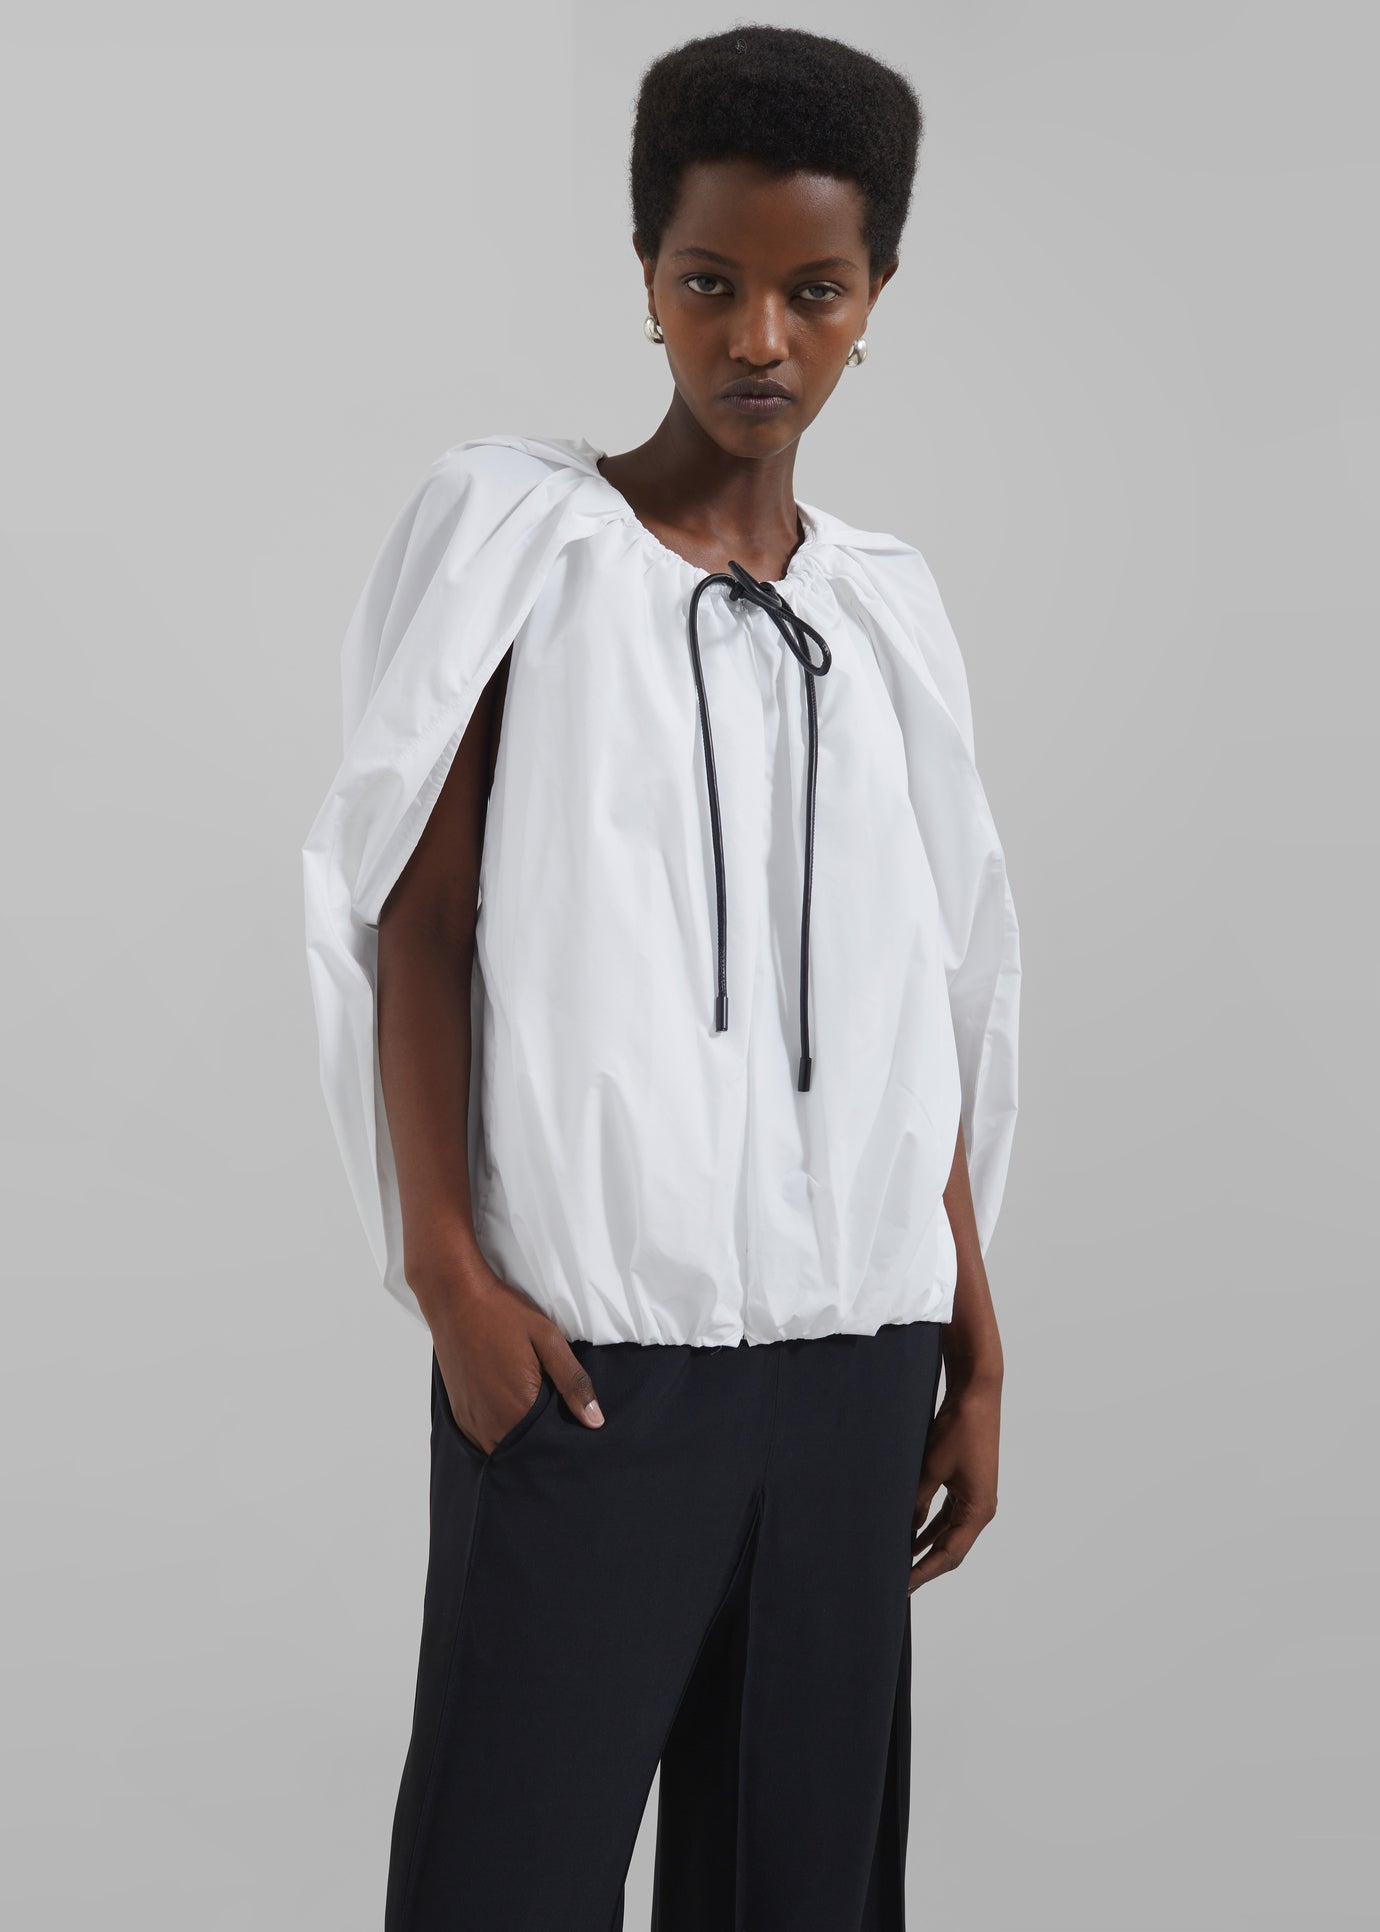 3.1 Phillip Lim Cocoon Zip Top With Cord Detail - White - 1